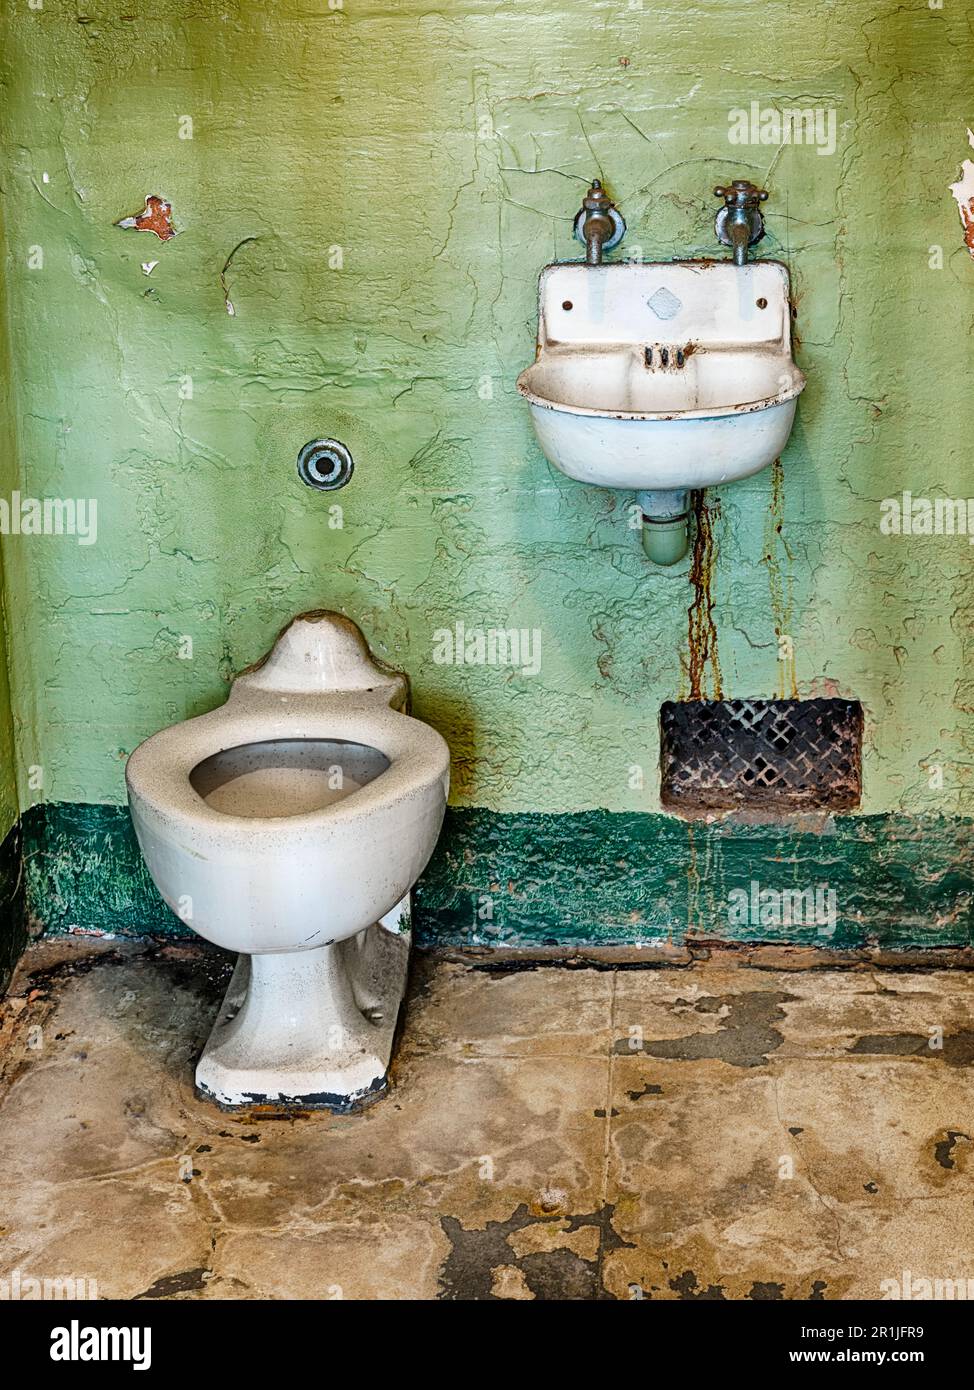 A toilet and sink provided basic sanitary facilities in one of the prison cells at the Alcatraz federal penitentiary. Stock Photo